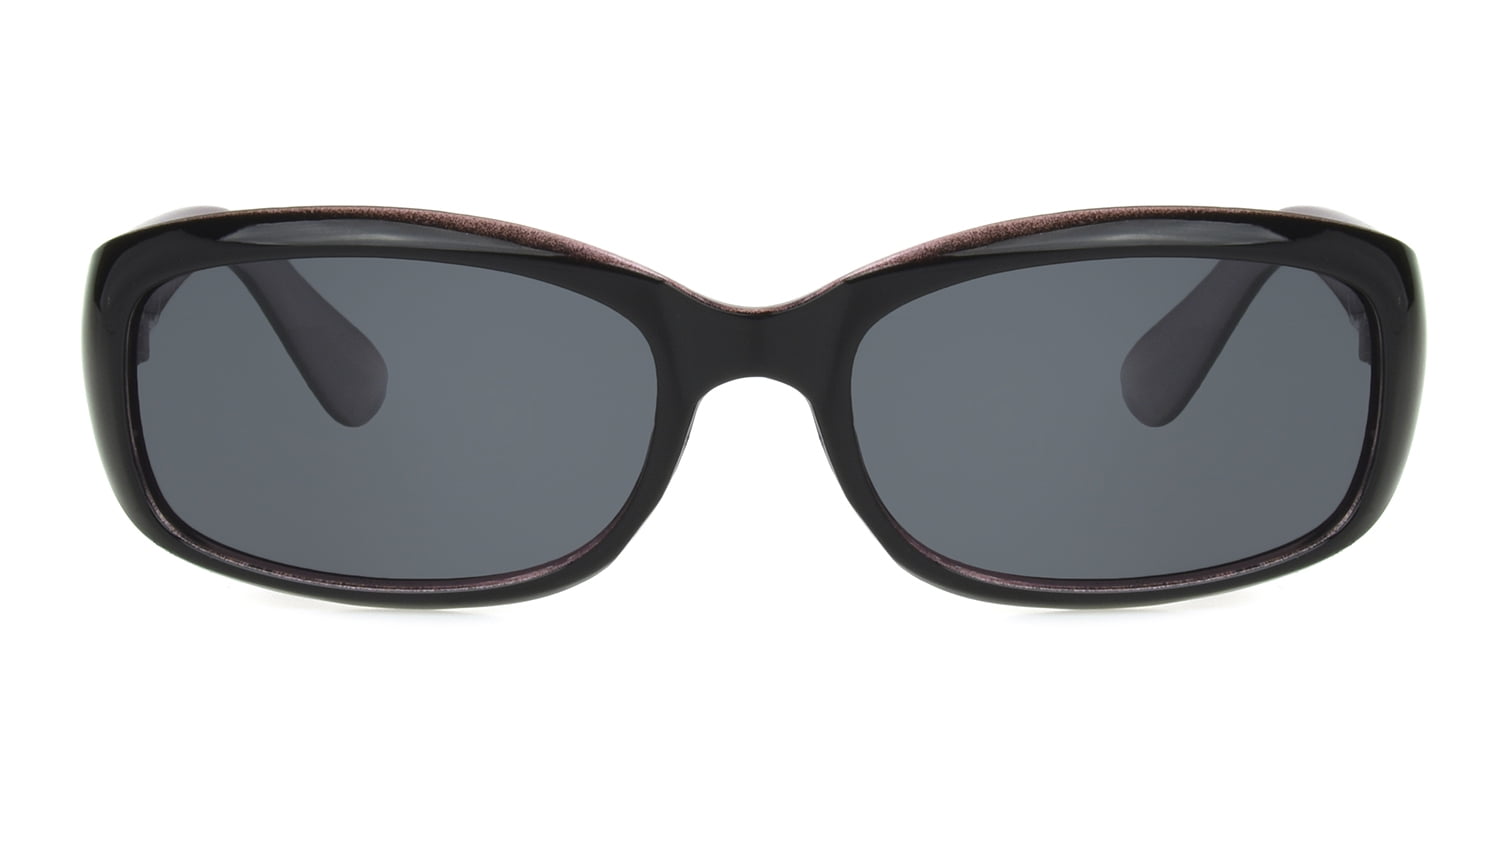 Sunglasses for a Diamond Face | Warby Parker